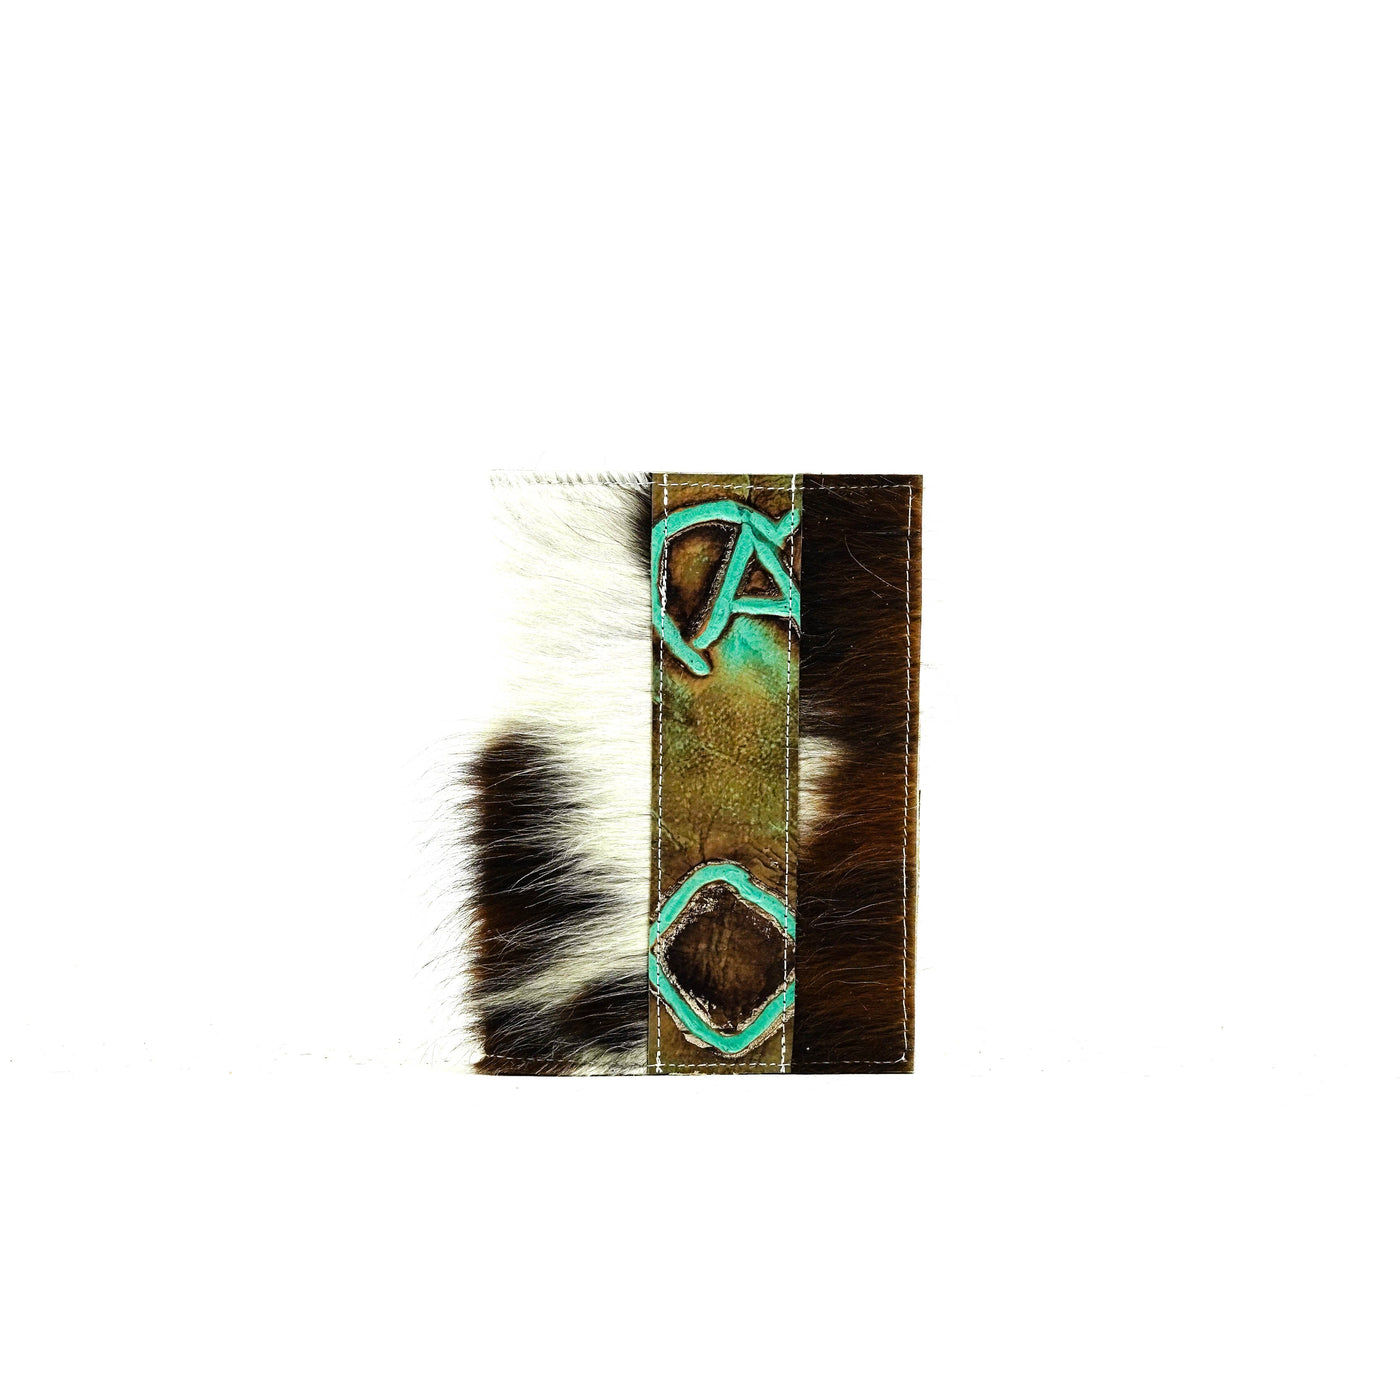 Small Notepad Cover - Tricolor w/ Turquoise Brands-Small Notepad Cover-Western-Cowhide-Bags-Handmade-Products-Gifts-Dancing Cactus Designs